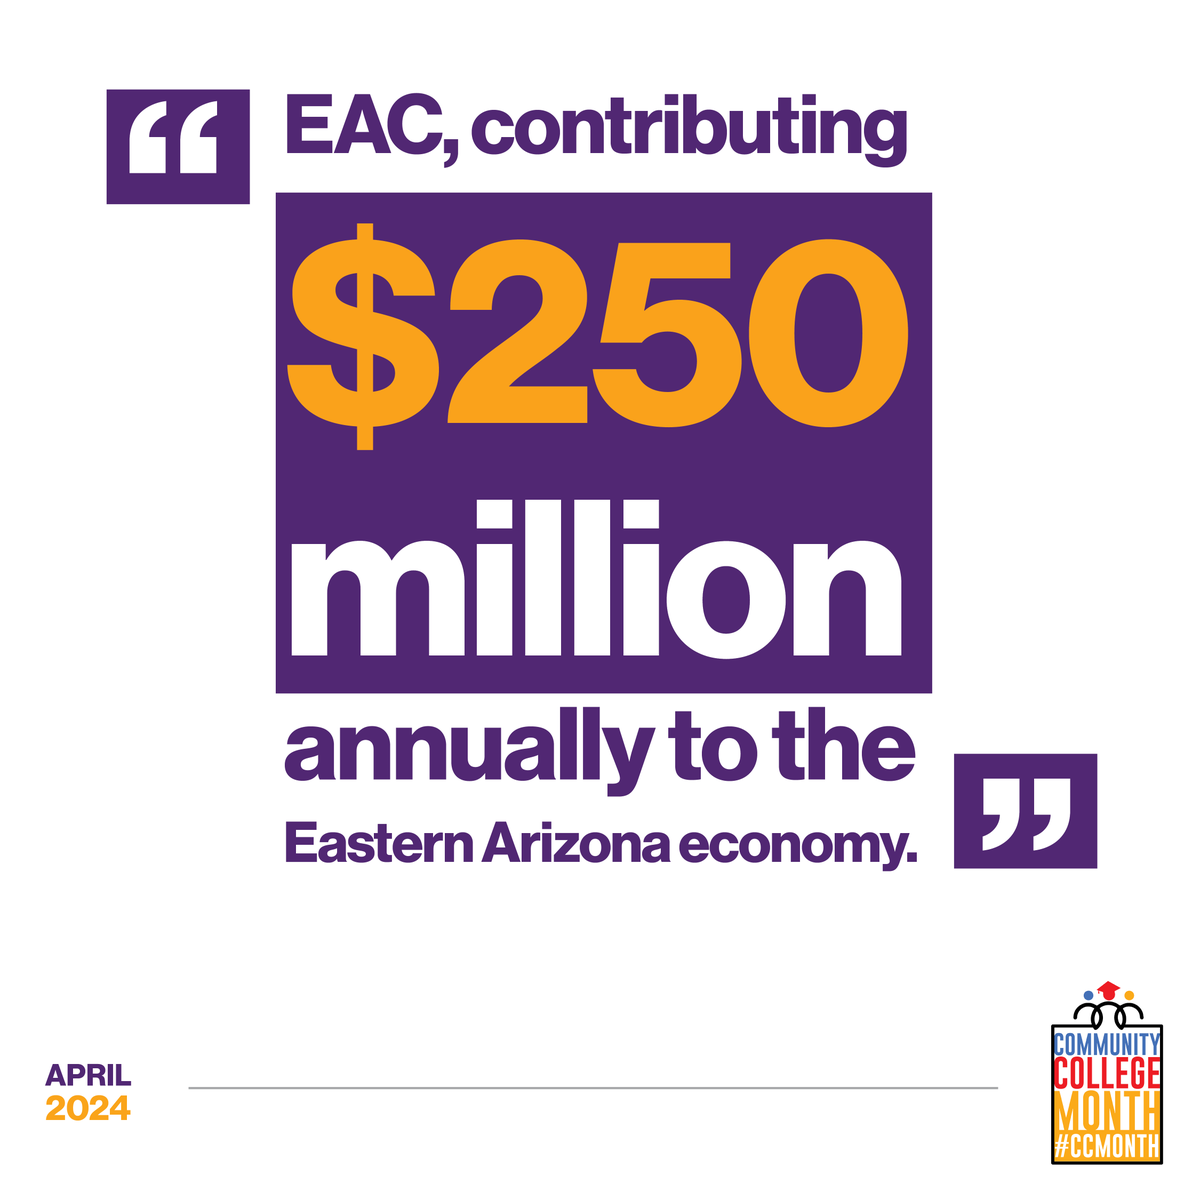 Did you know that EAC contributes $250 million annually to the Eastern Arizona e #EAC #LocalEconomy #CommunityCollegeconomy? That's something to celebrate during #CCMonth! #EconomicImpact